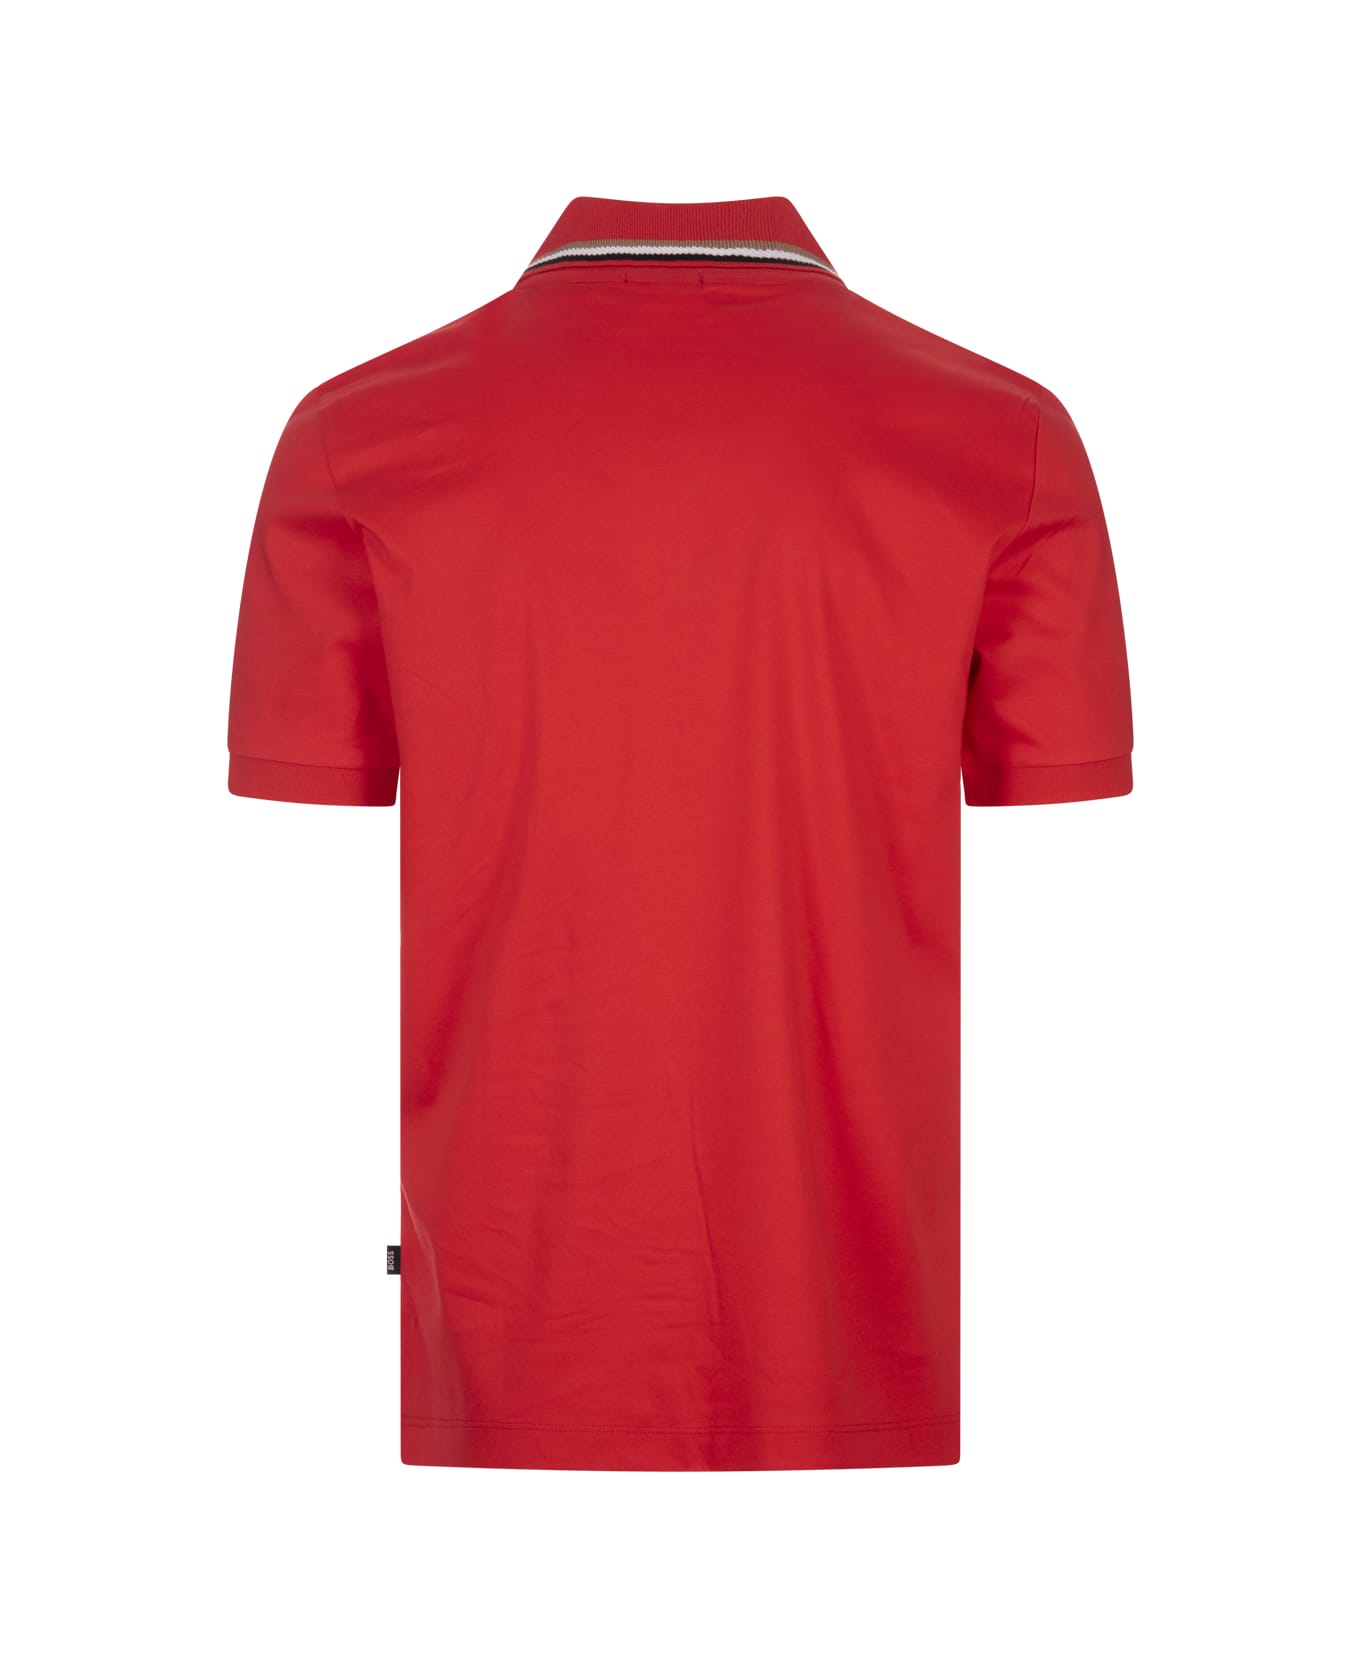 Hugo Boss Red Slim Fit Polo Shirt With Striped Collar - Red